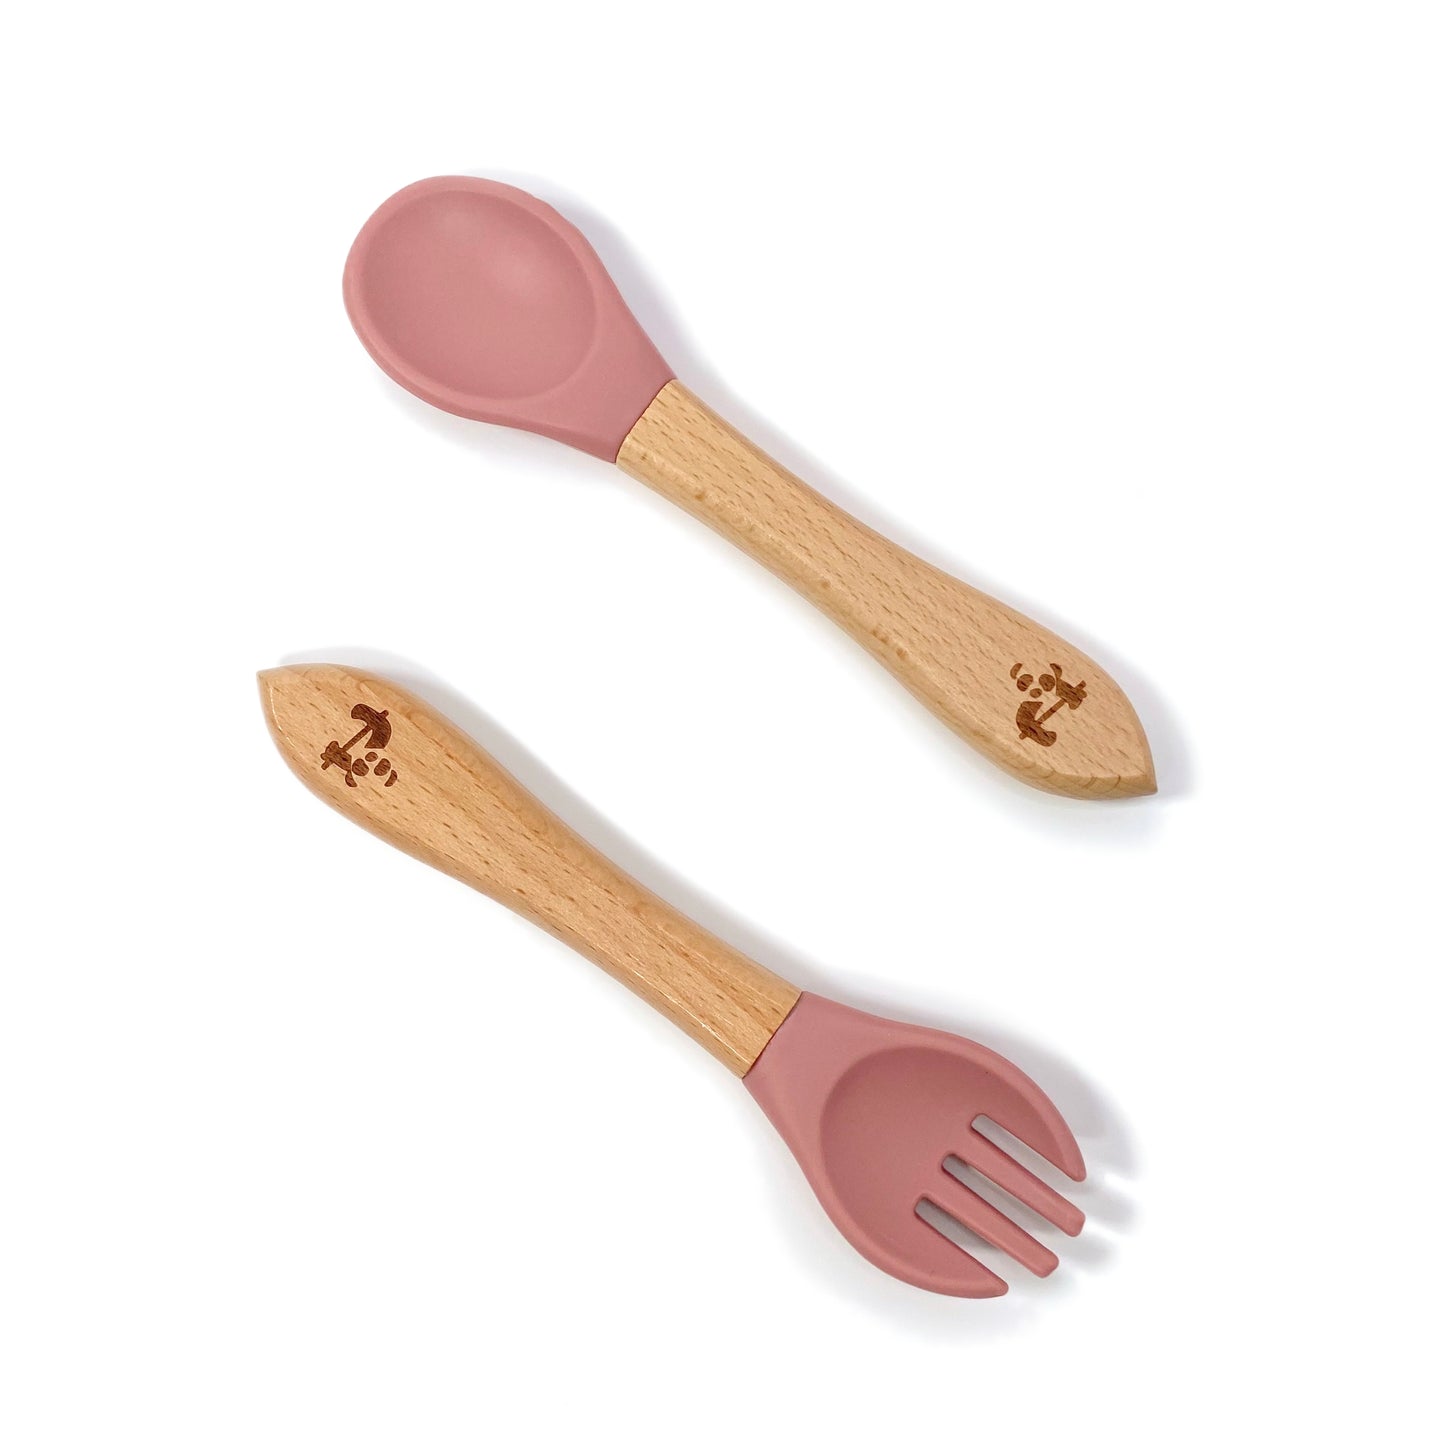 A set of children’s bamboo and silicone cutlery, in a blush pink colour.